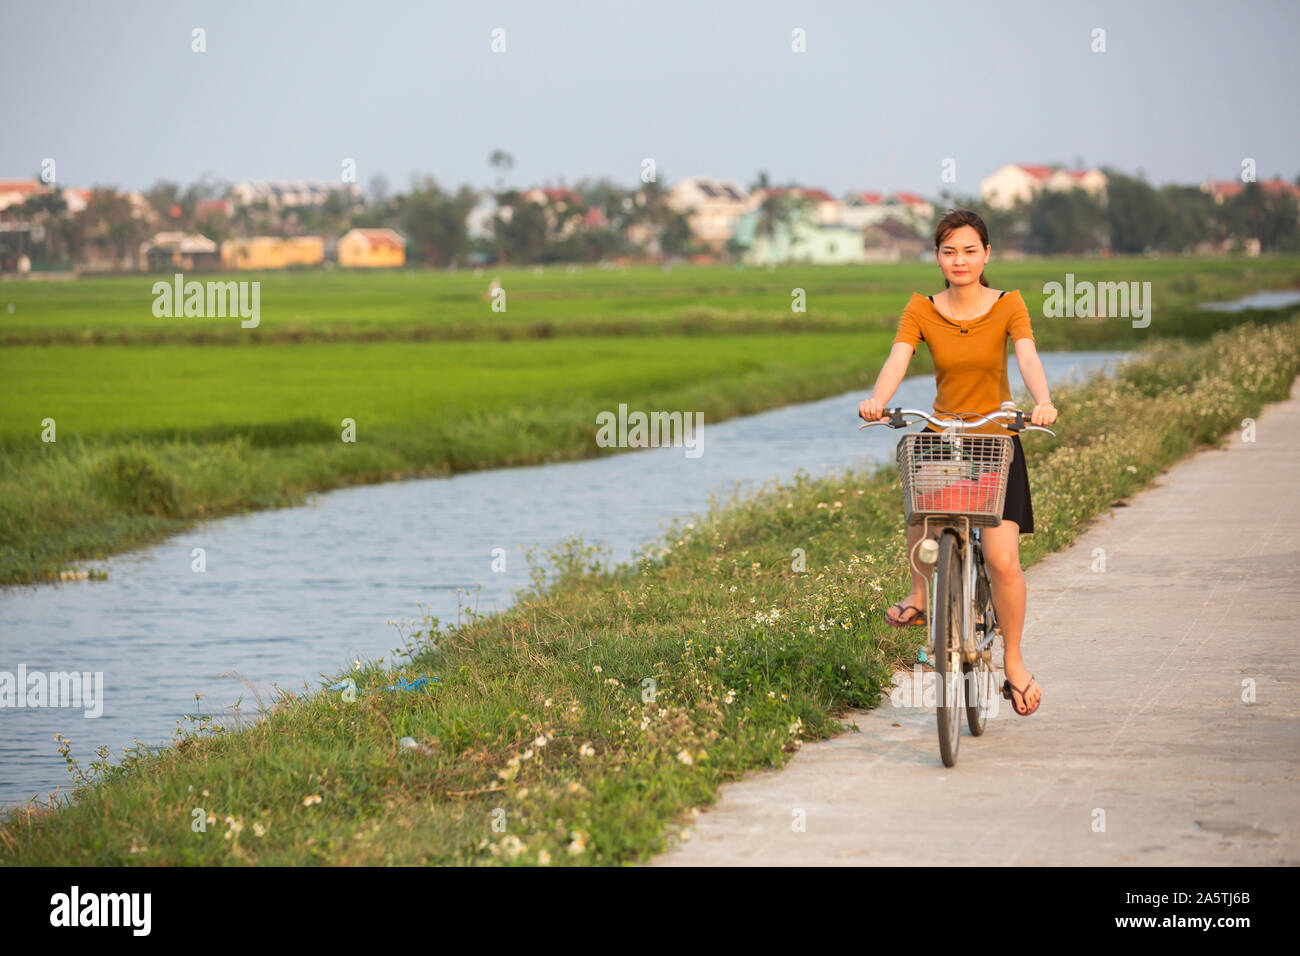 A young woman rides a bicycle past a rice paddy in Hoi An, Vietnam. Stock Photo